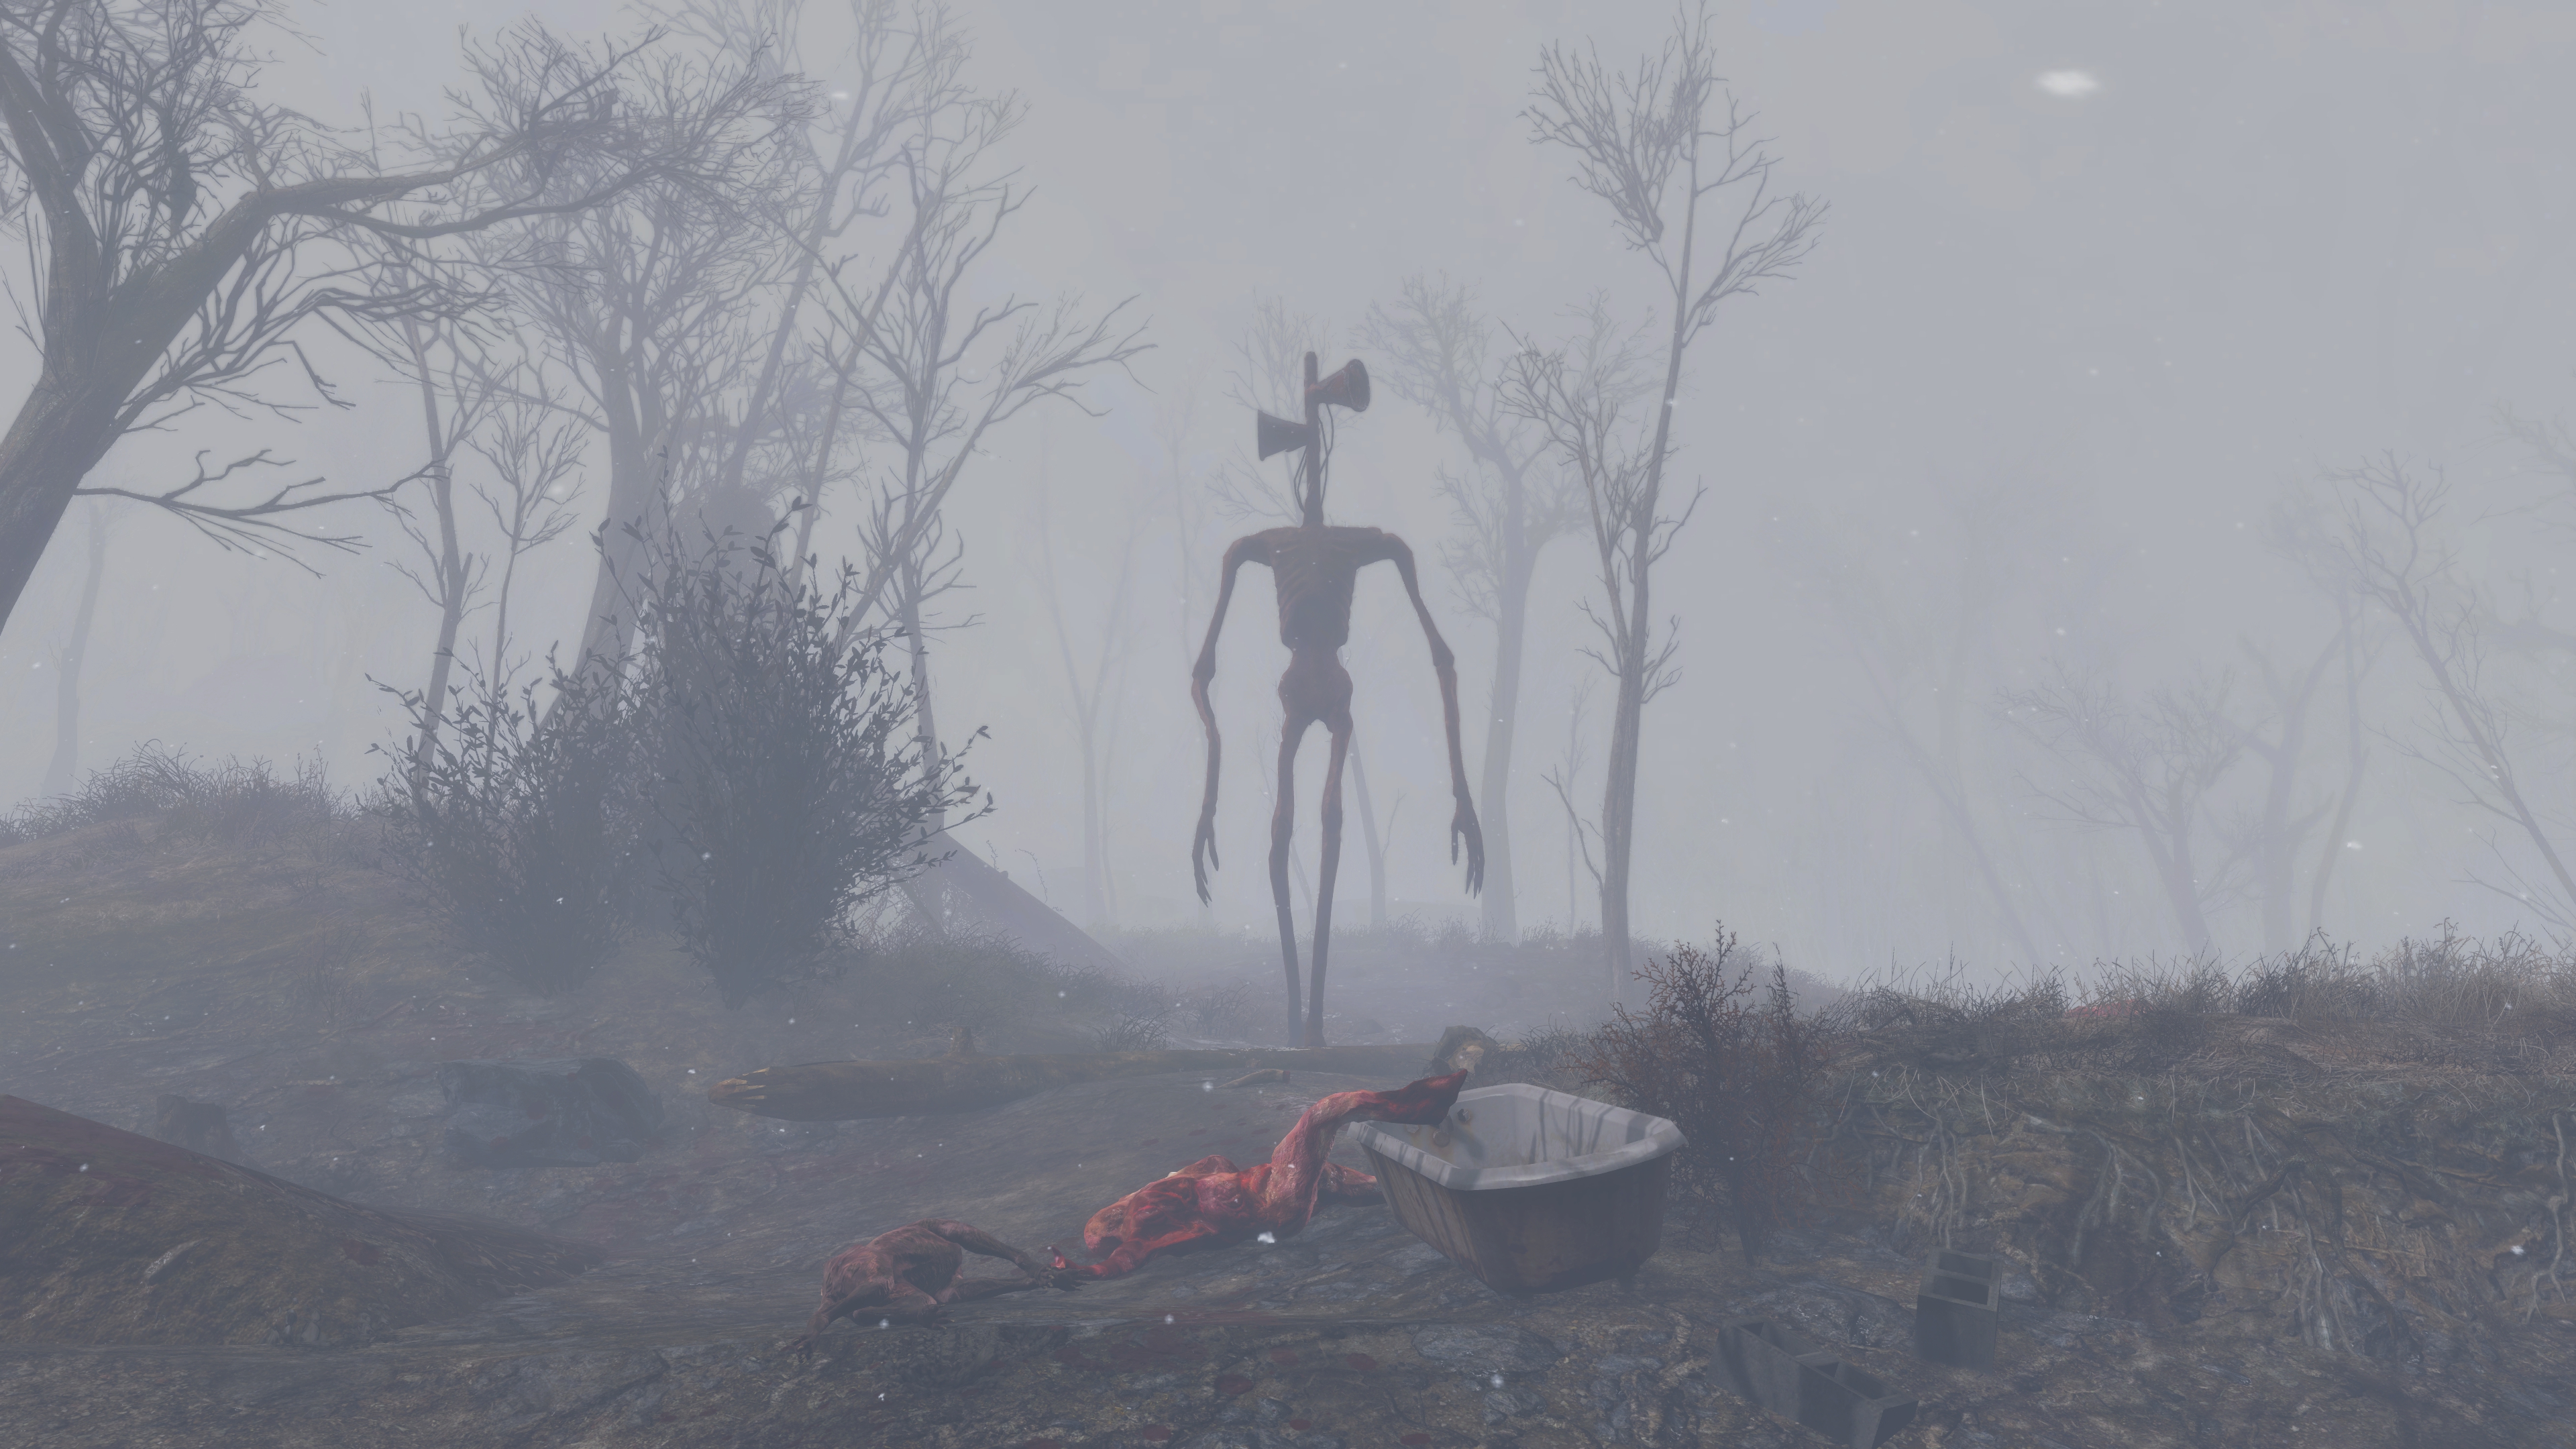 Get Chased By Sirenhead In This Creepy Fallout 4 Mod Pc Gamer